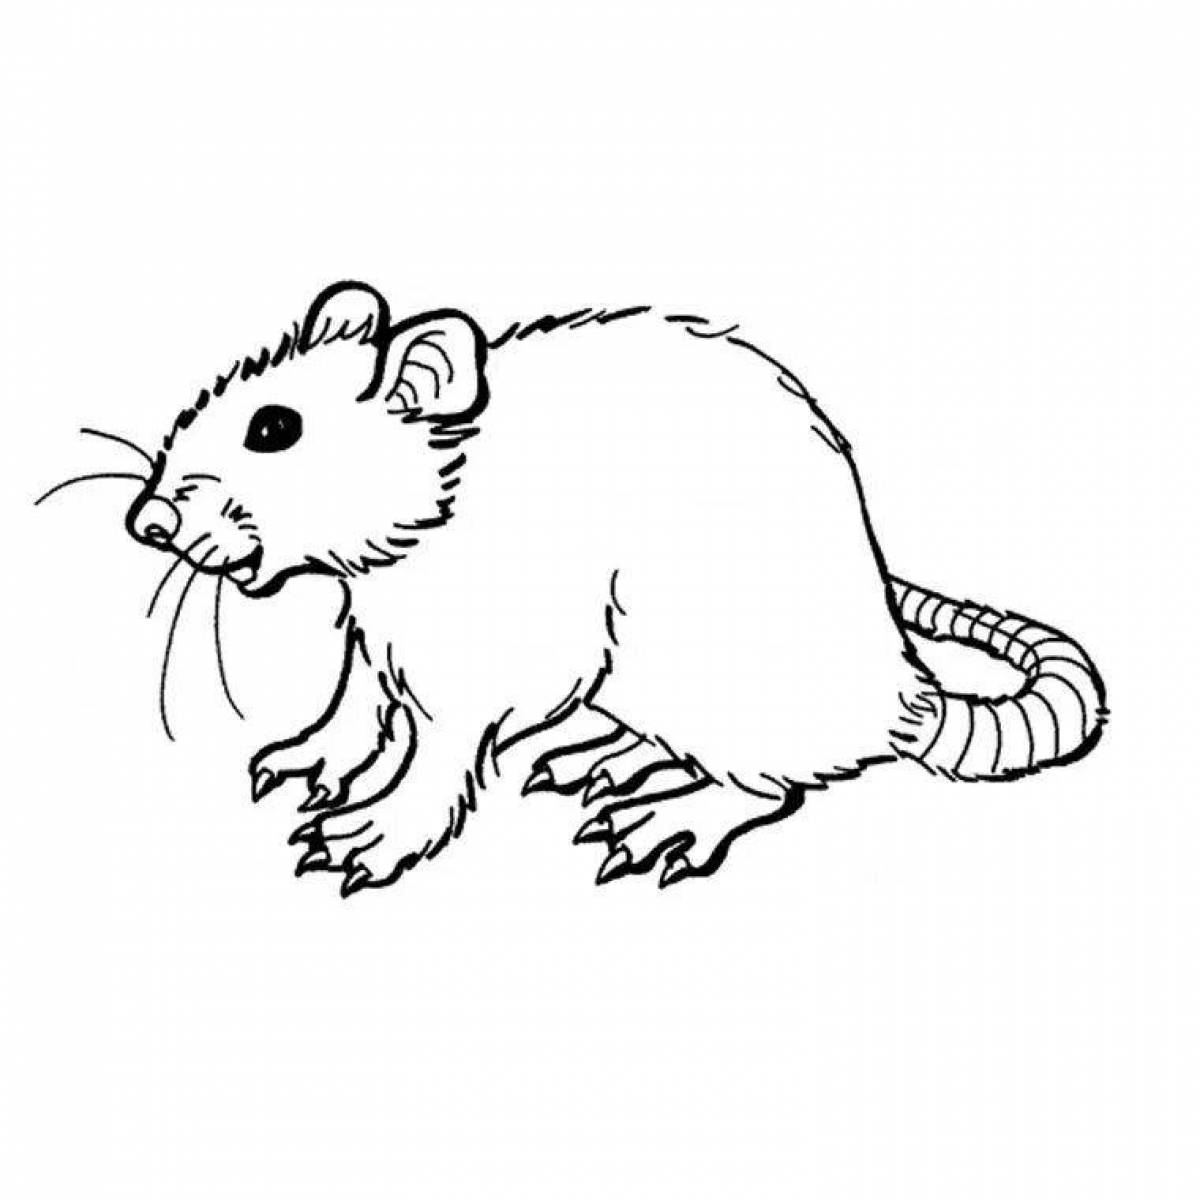 Colorful rat coloring book for kids